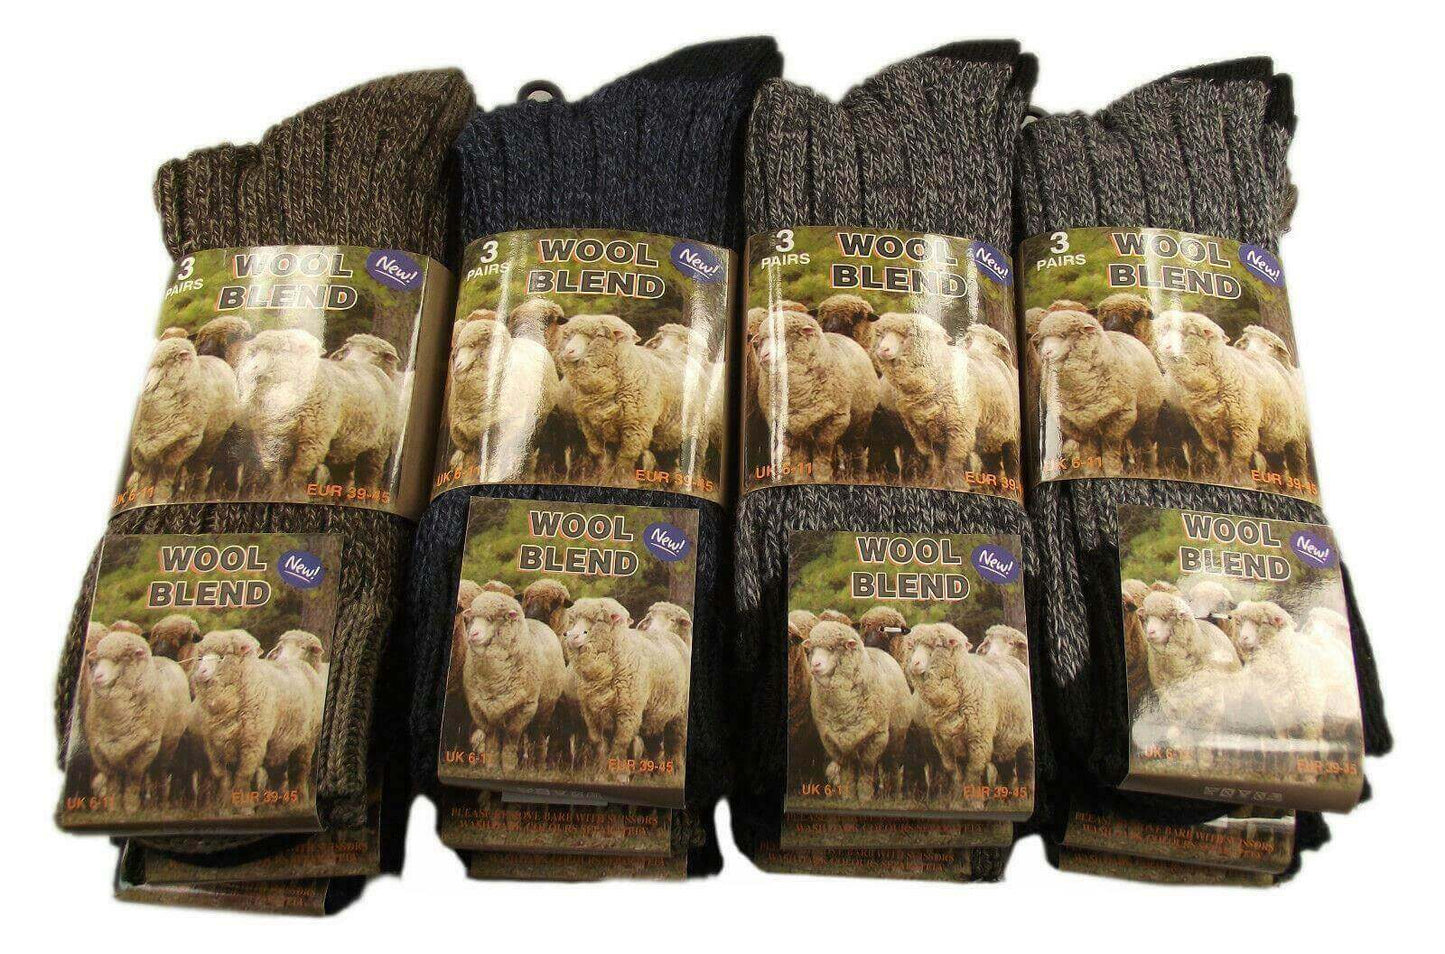 6 Pairs of Men's Wool Socks Of Thick Chunky Work Outdoor Boot Socks. Buy now for £7.00. A Socks by Sock Stack. 6-11, anti bacterial, assorted, athletics, boot, boys, breathable, comfortable, cosy, hiking, home, Lambs wool, mens, mens socks, outdoor, runni